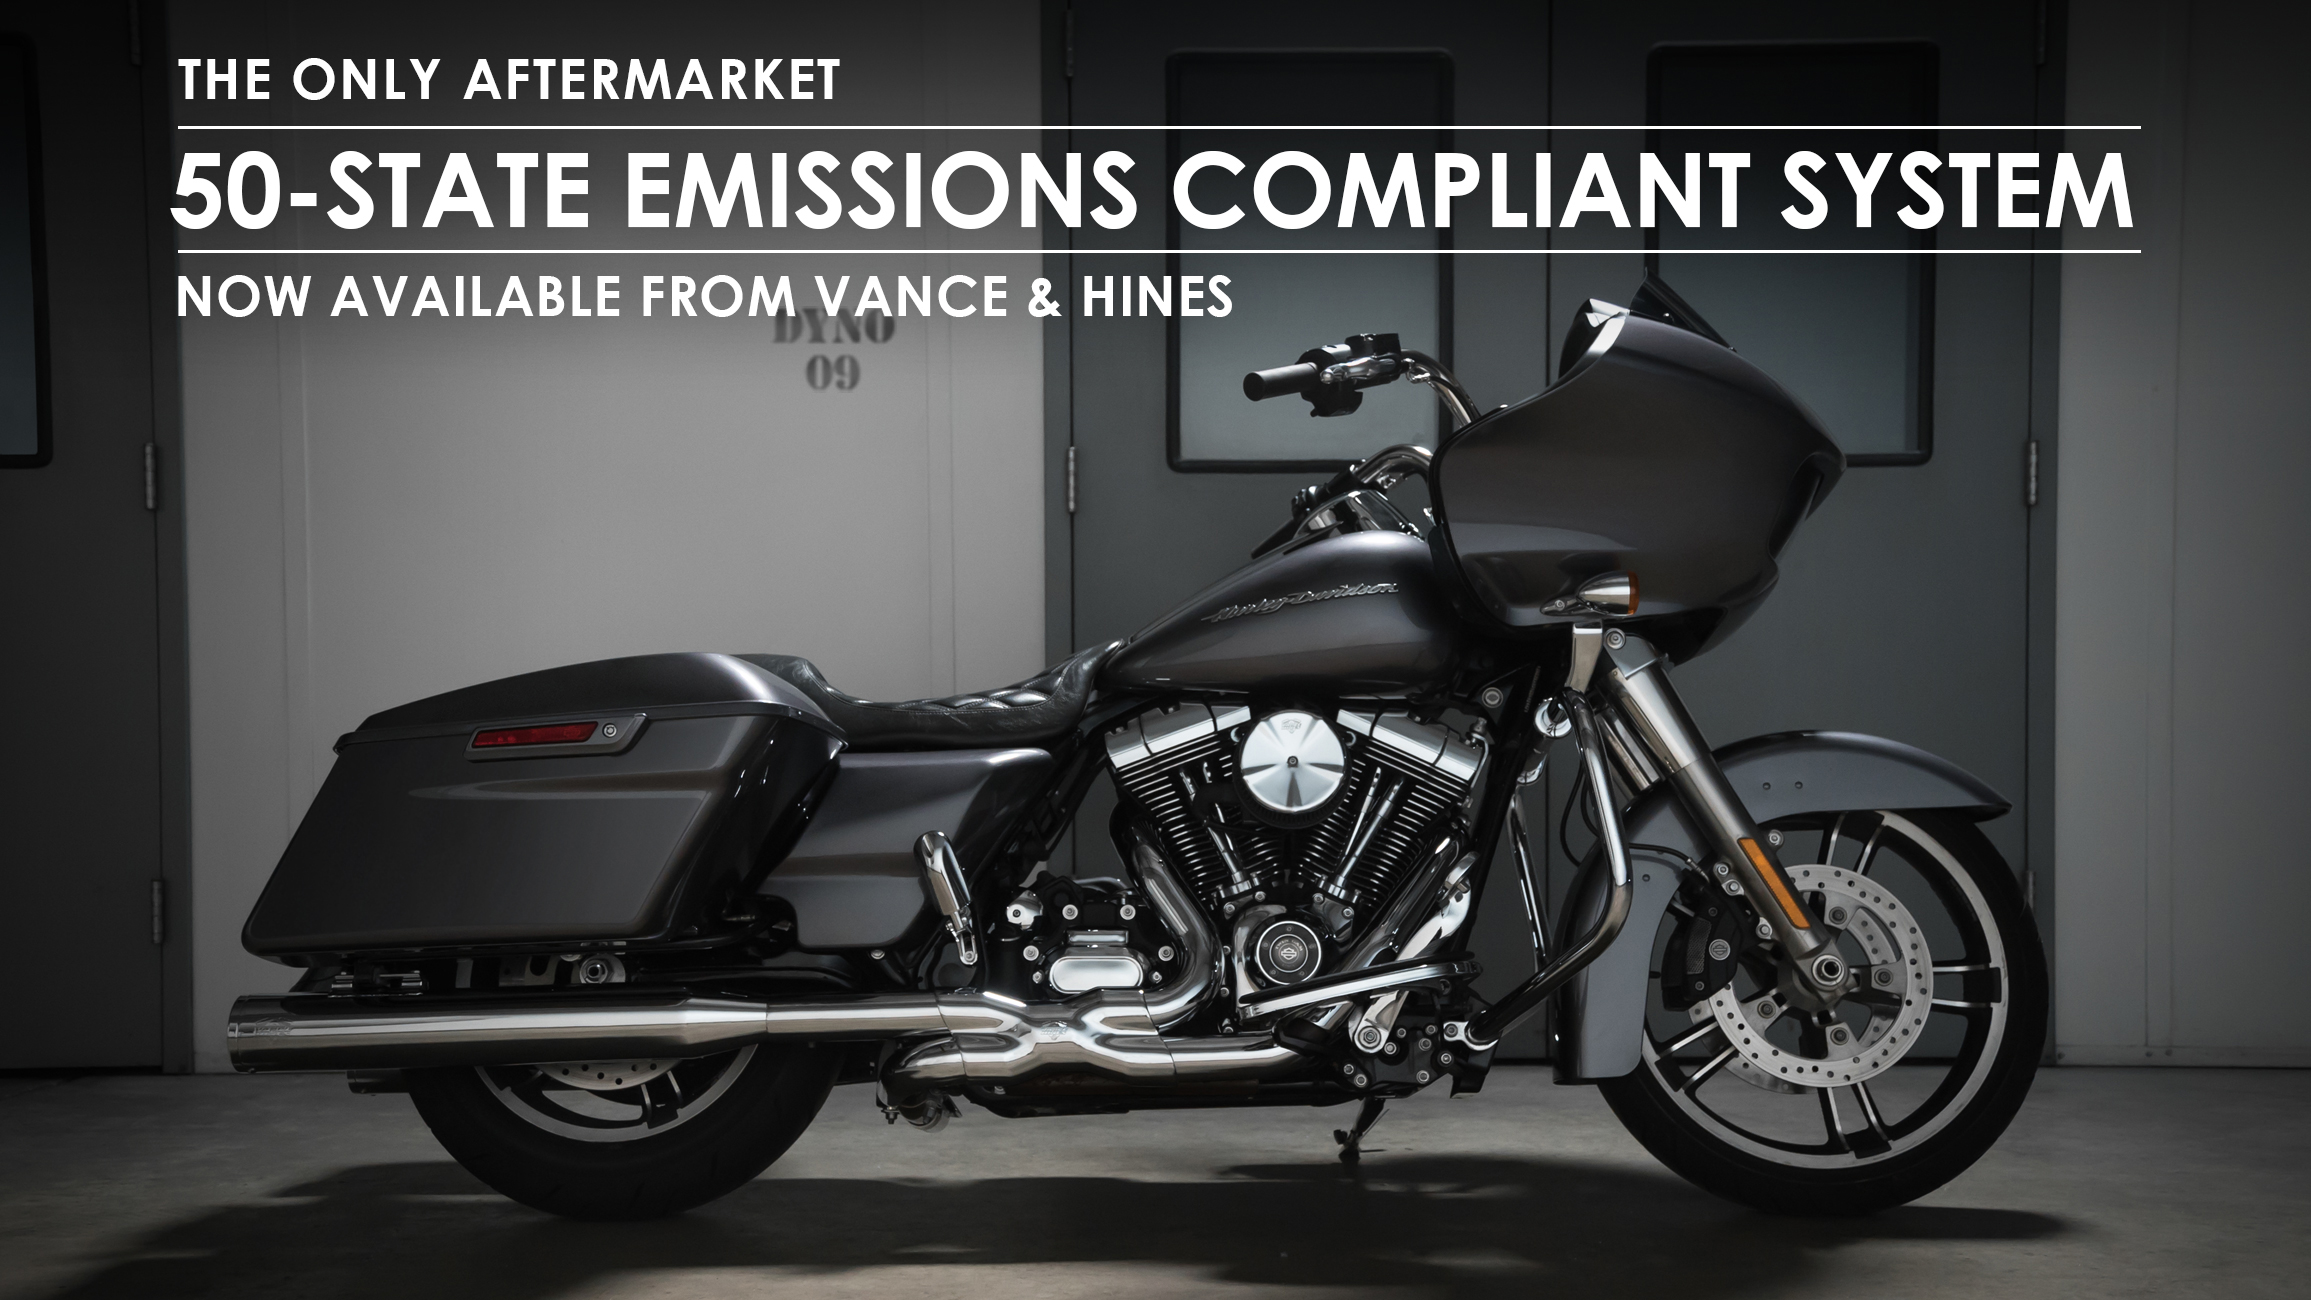 vance and hines compliant